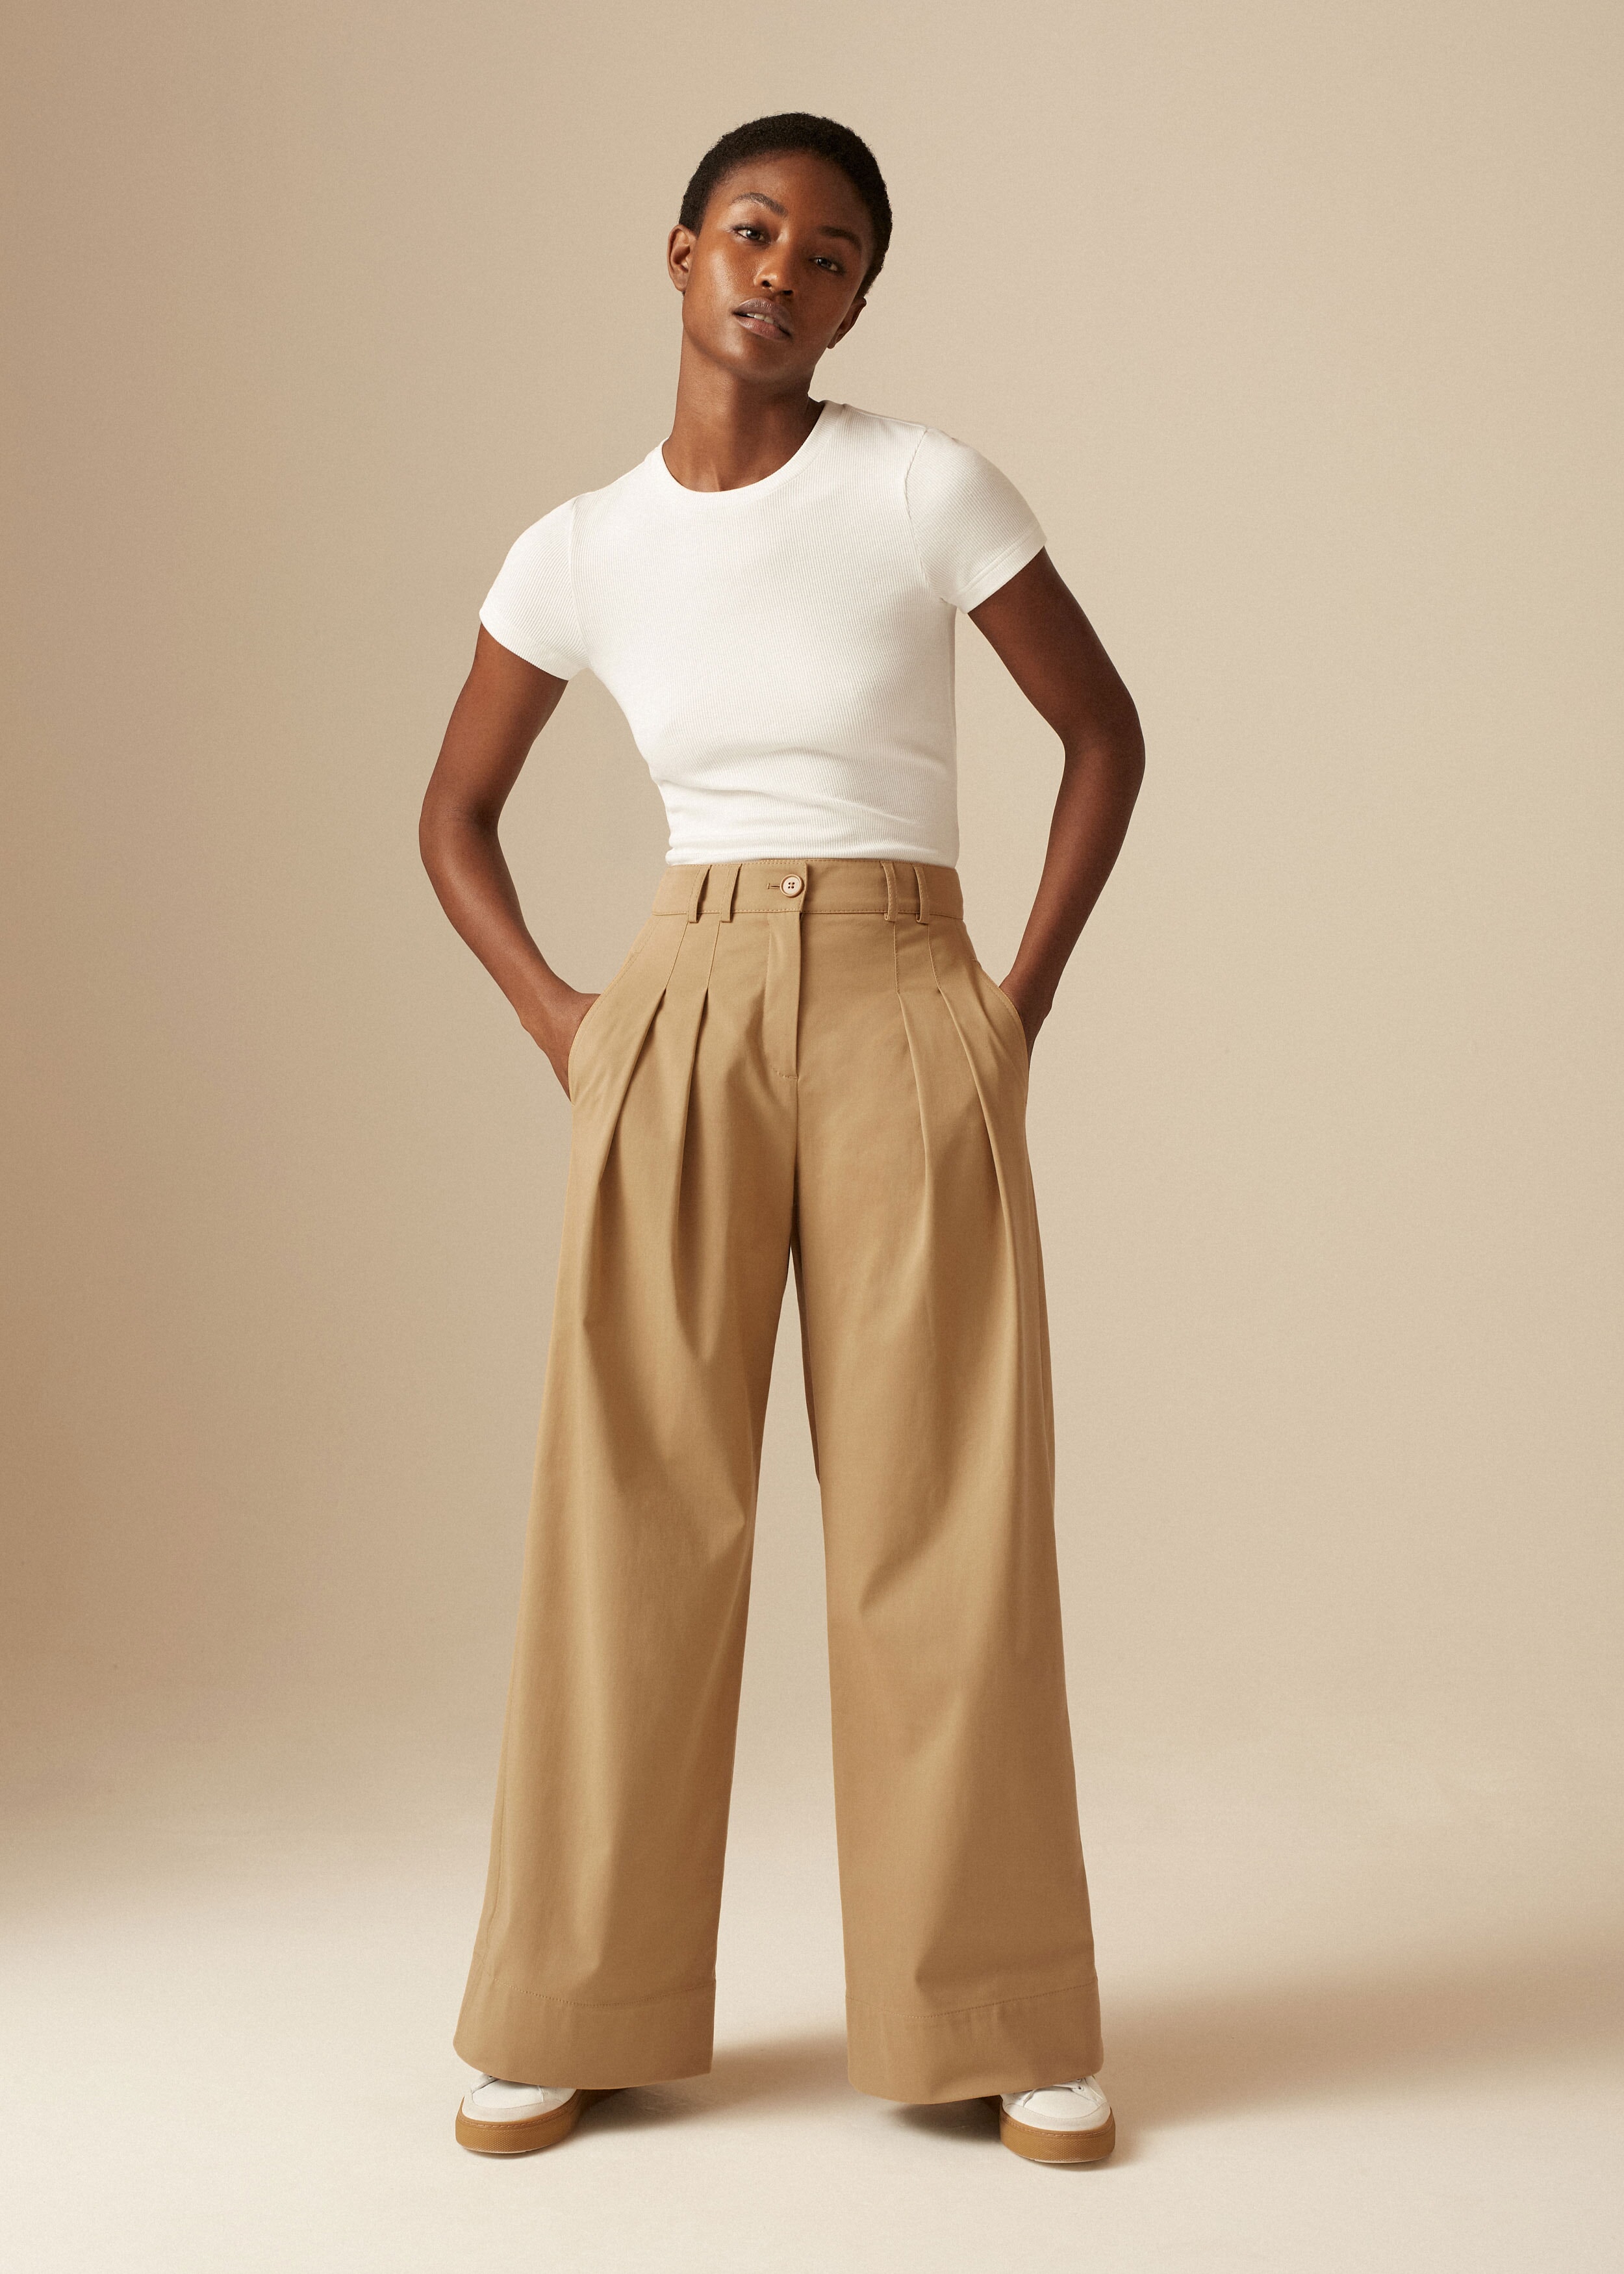 ASOS DESIGN | ASOS Tailored Super High Waist Balloon Tapered PANTS With  Self Belt | High waisted trousers outfit, Tapered trousers, High waisted  pants